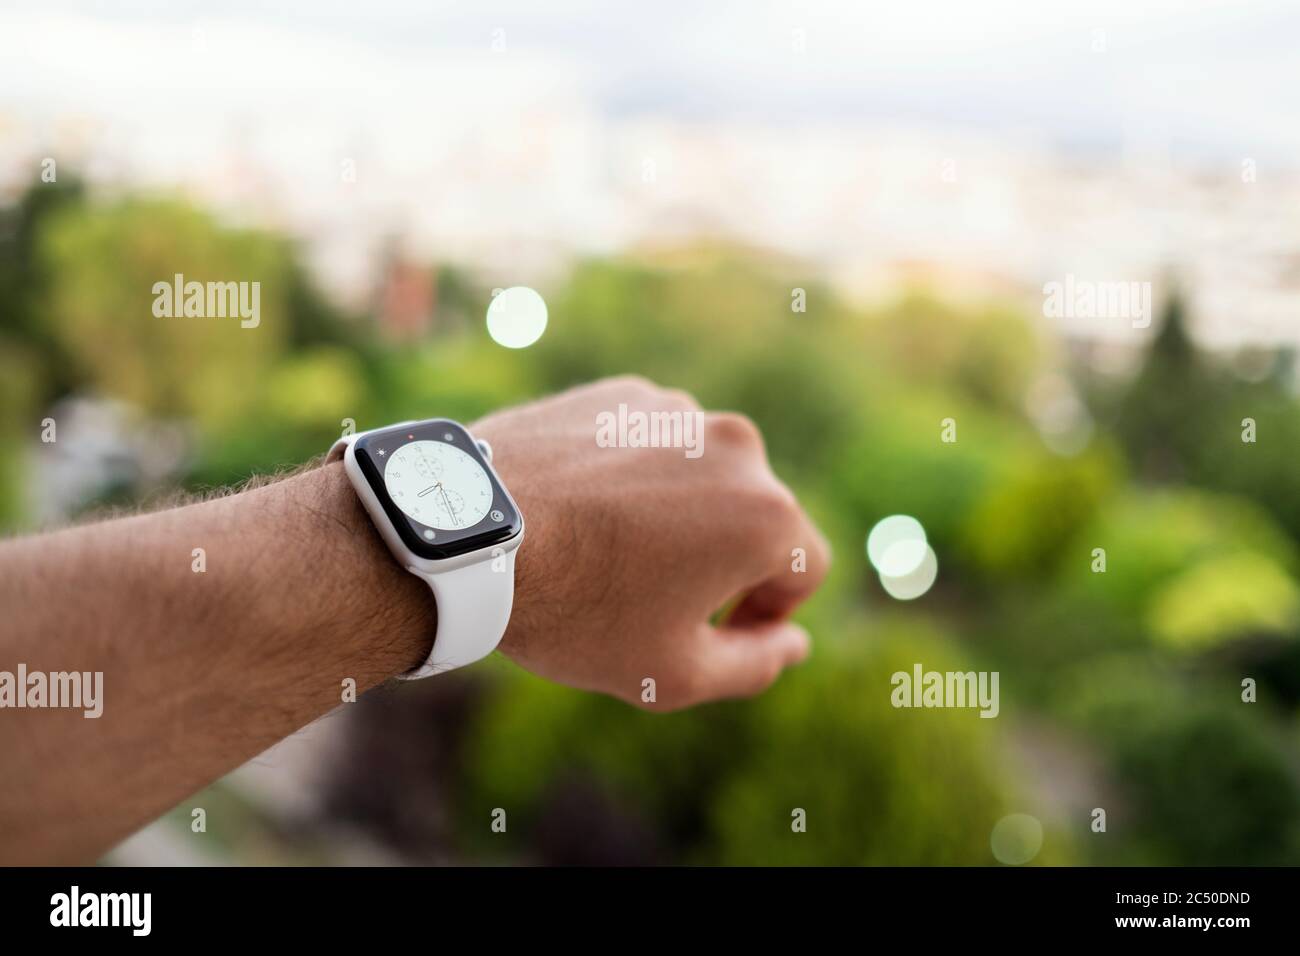 Izmir, Turkey - June 11, 2020: Close up shot of Apple brand 5th generation white colored Apple watch on a mans wrist and defocused green background. Stock Photo